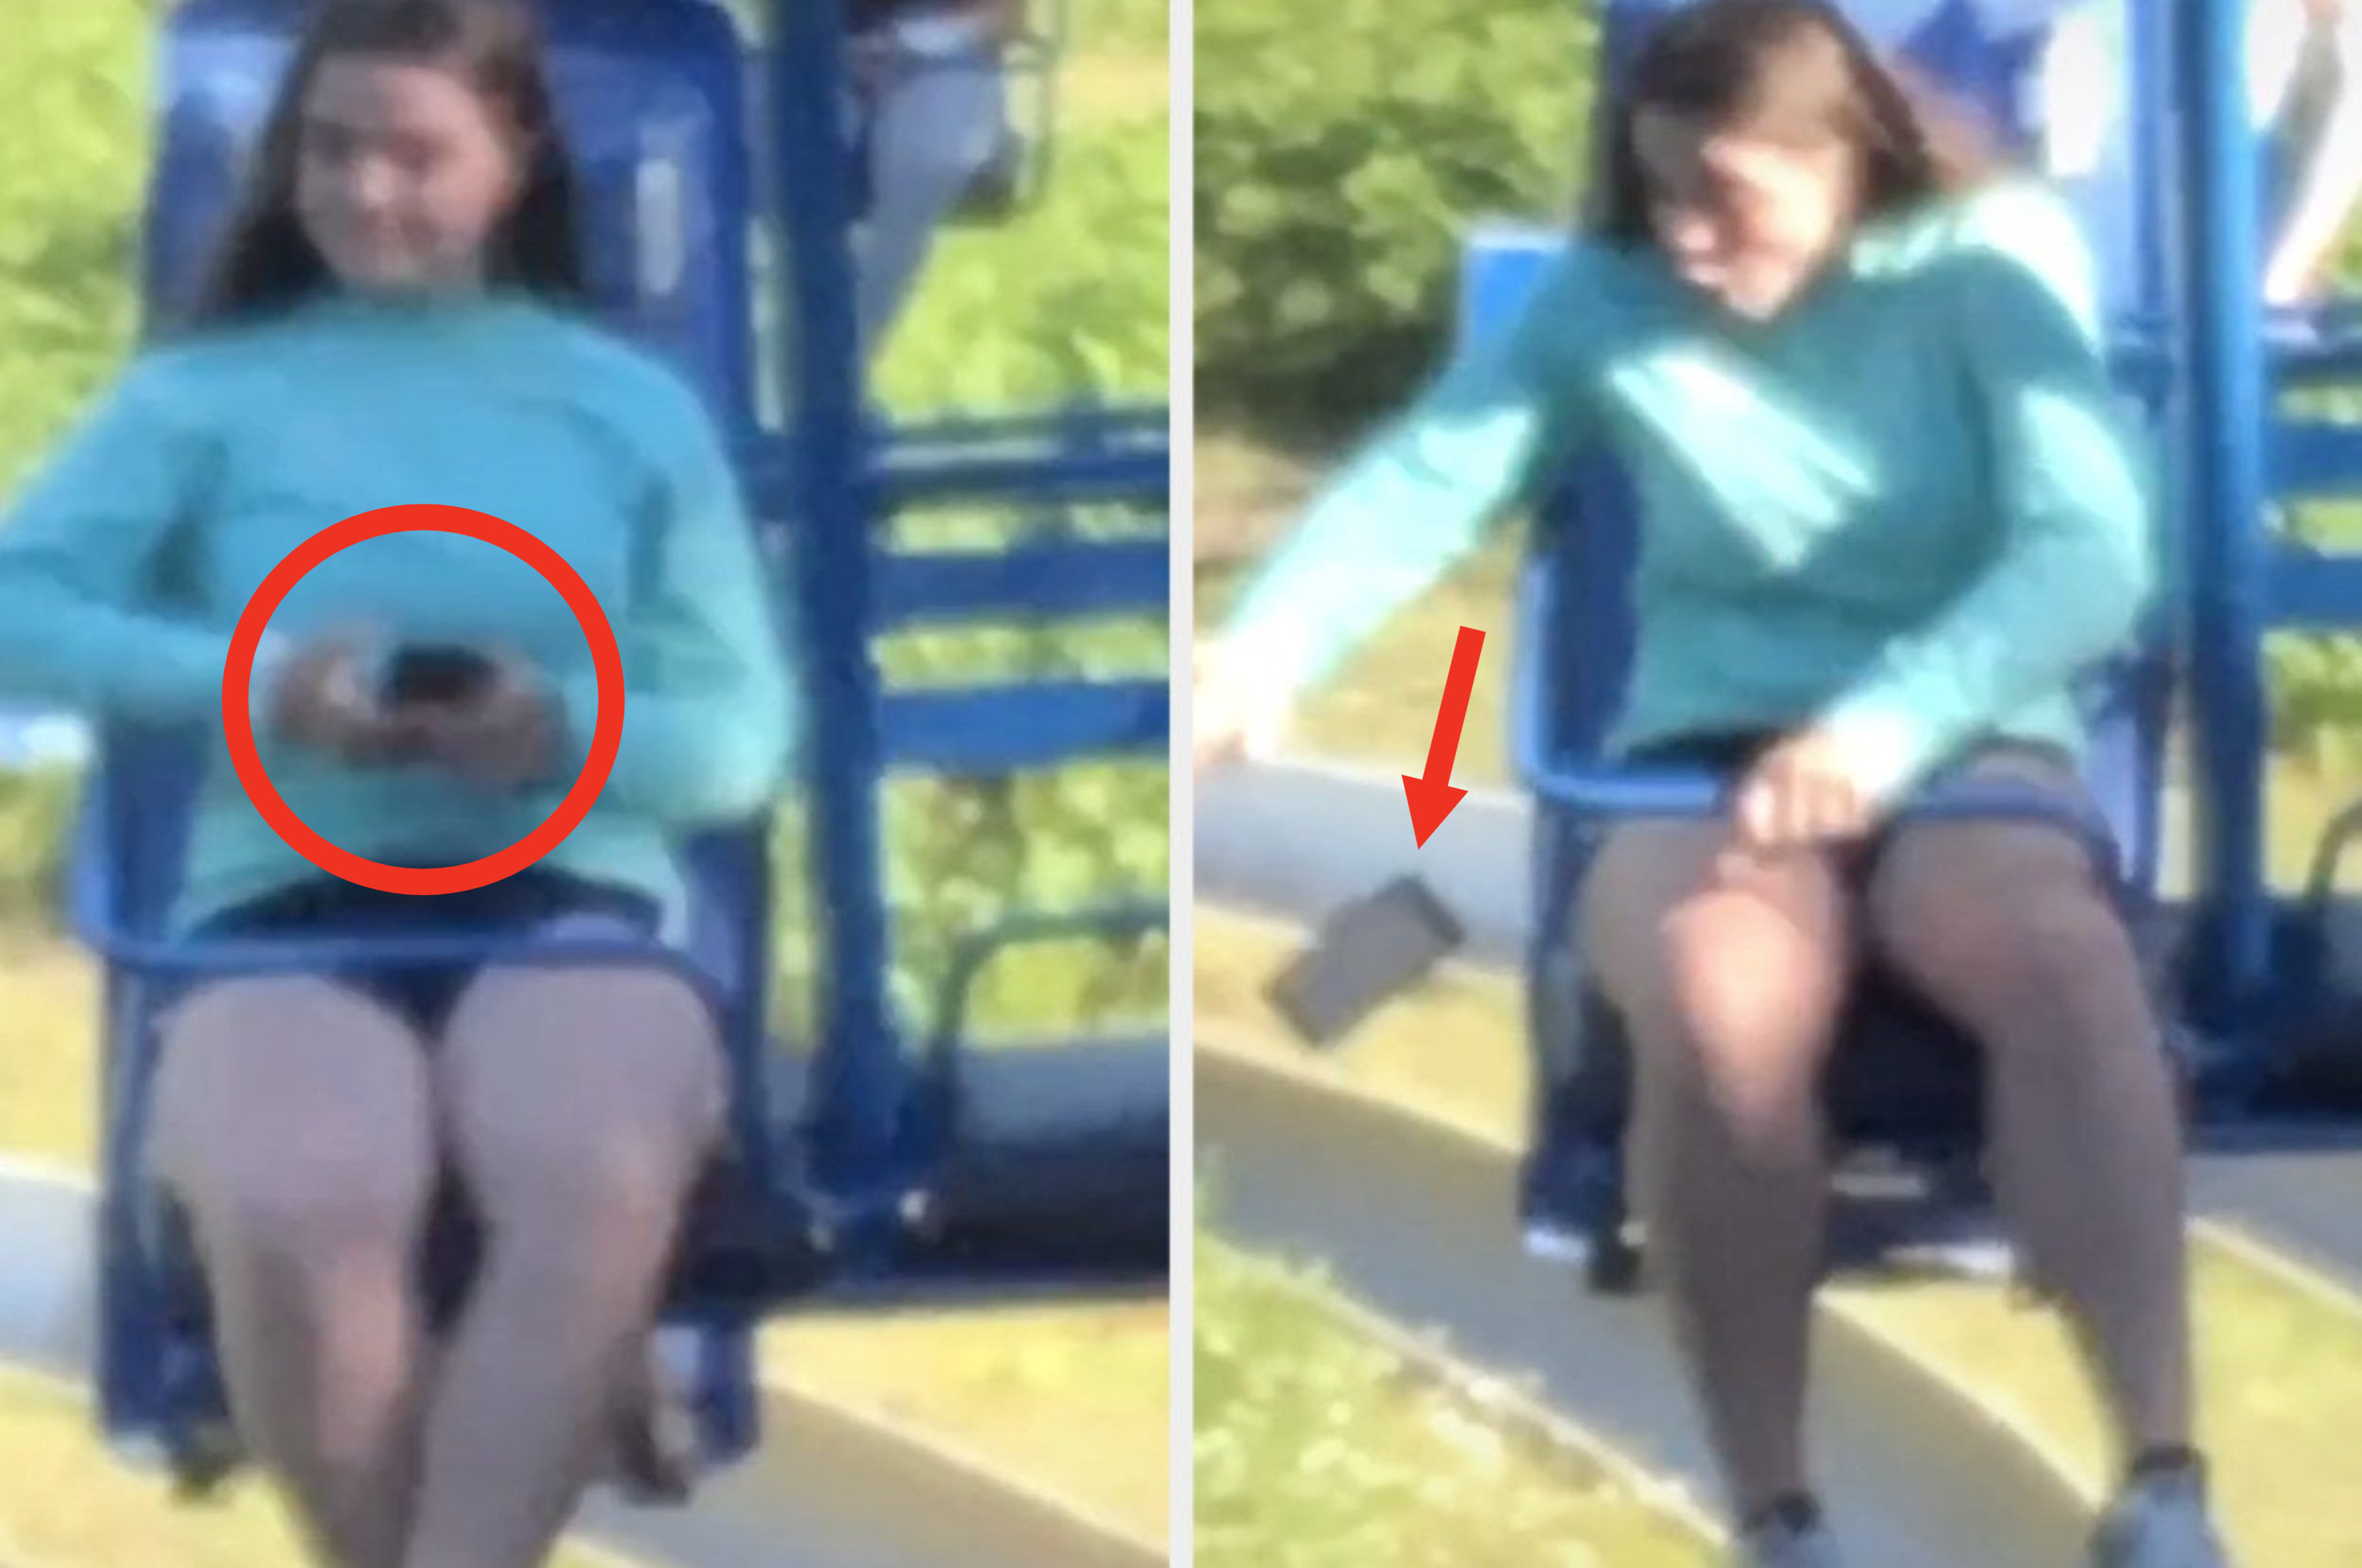 Someone holds their phone on a theme park ride above ground and then reacts in shock when they accidentally drop it